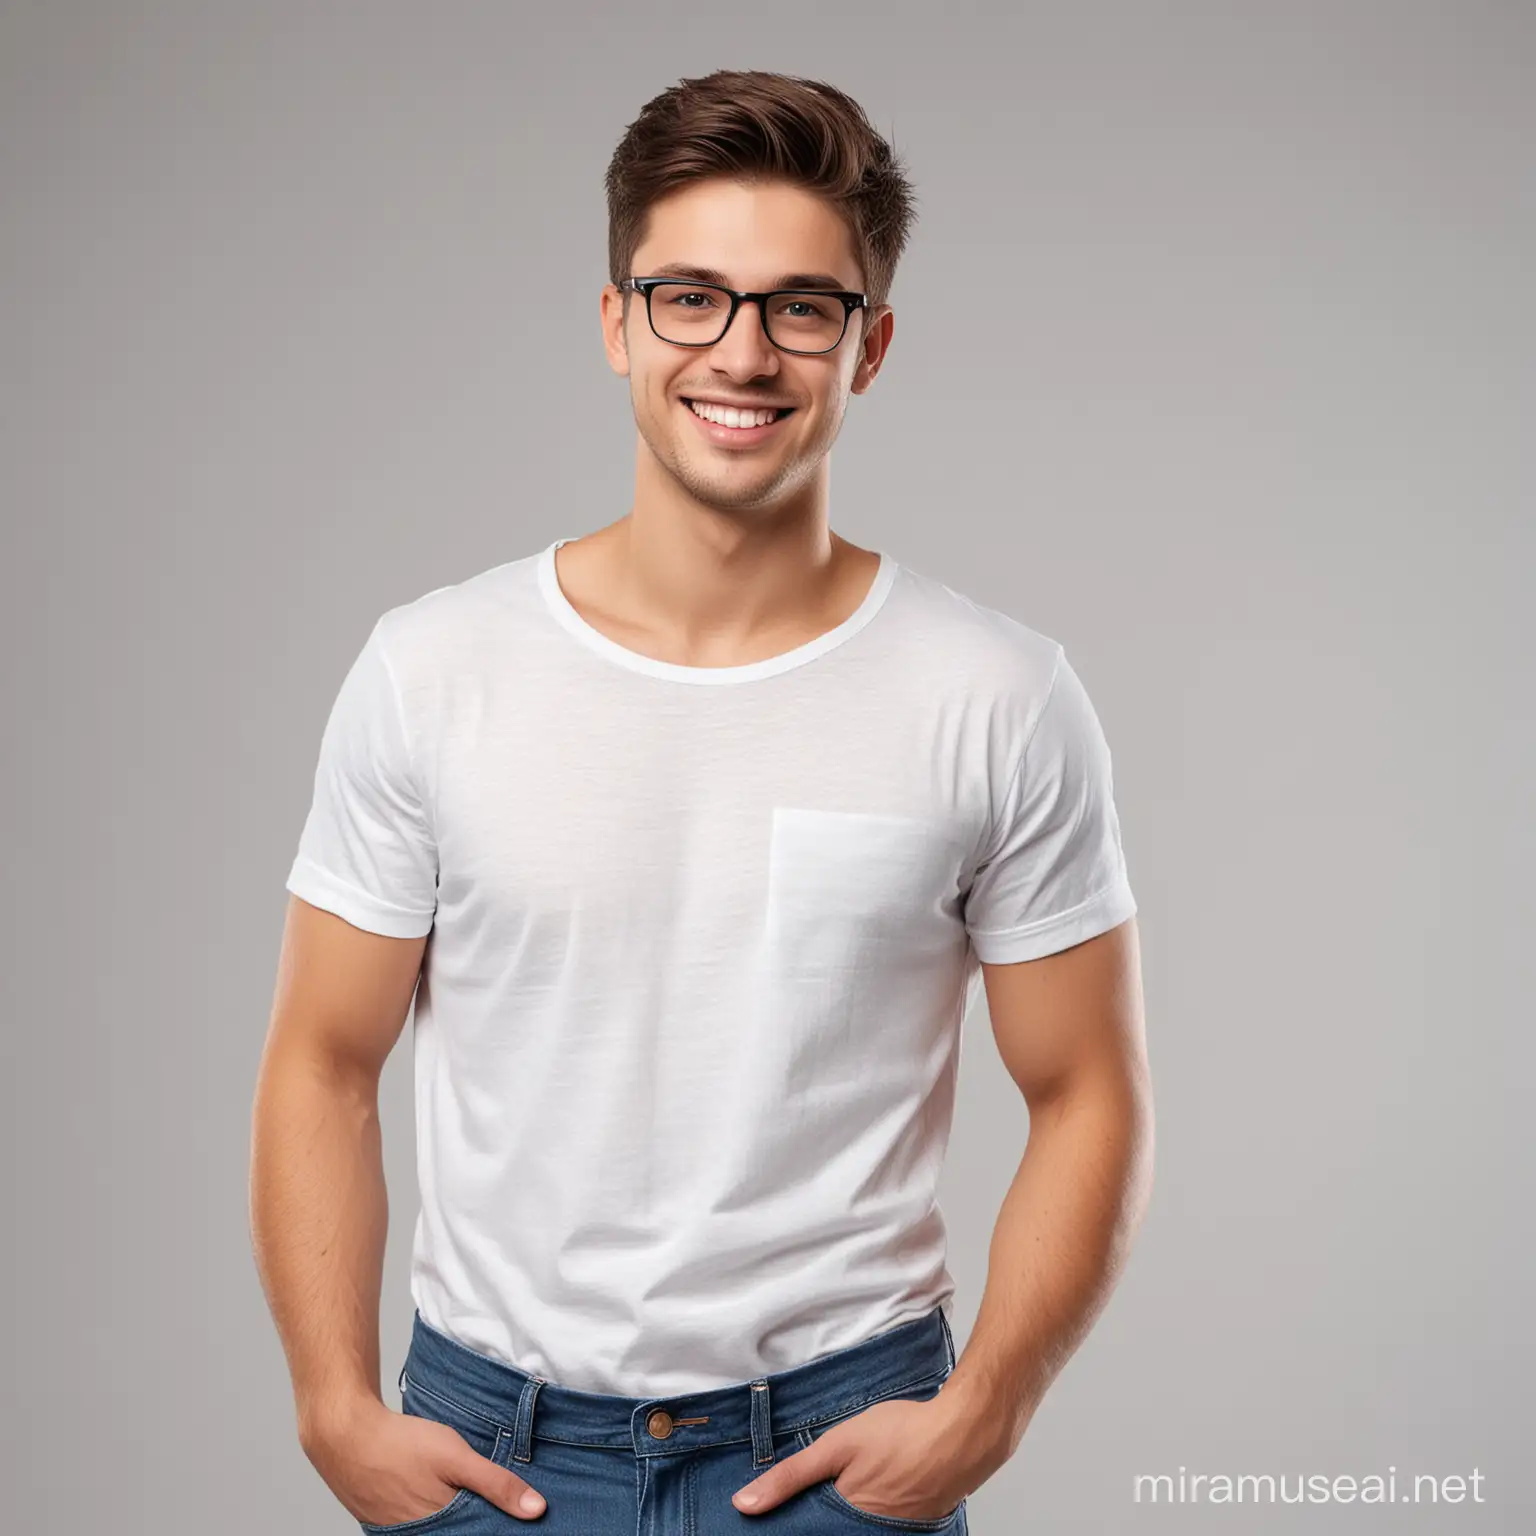 Smiling Young Man in Casual Attire and Glasses Studio Portrait